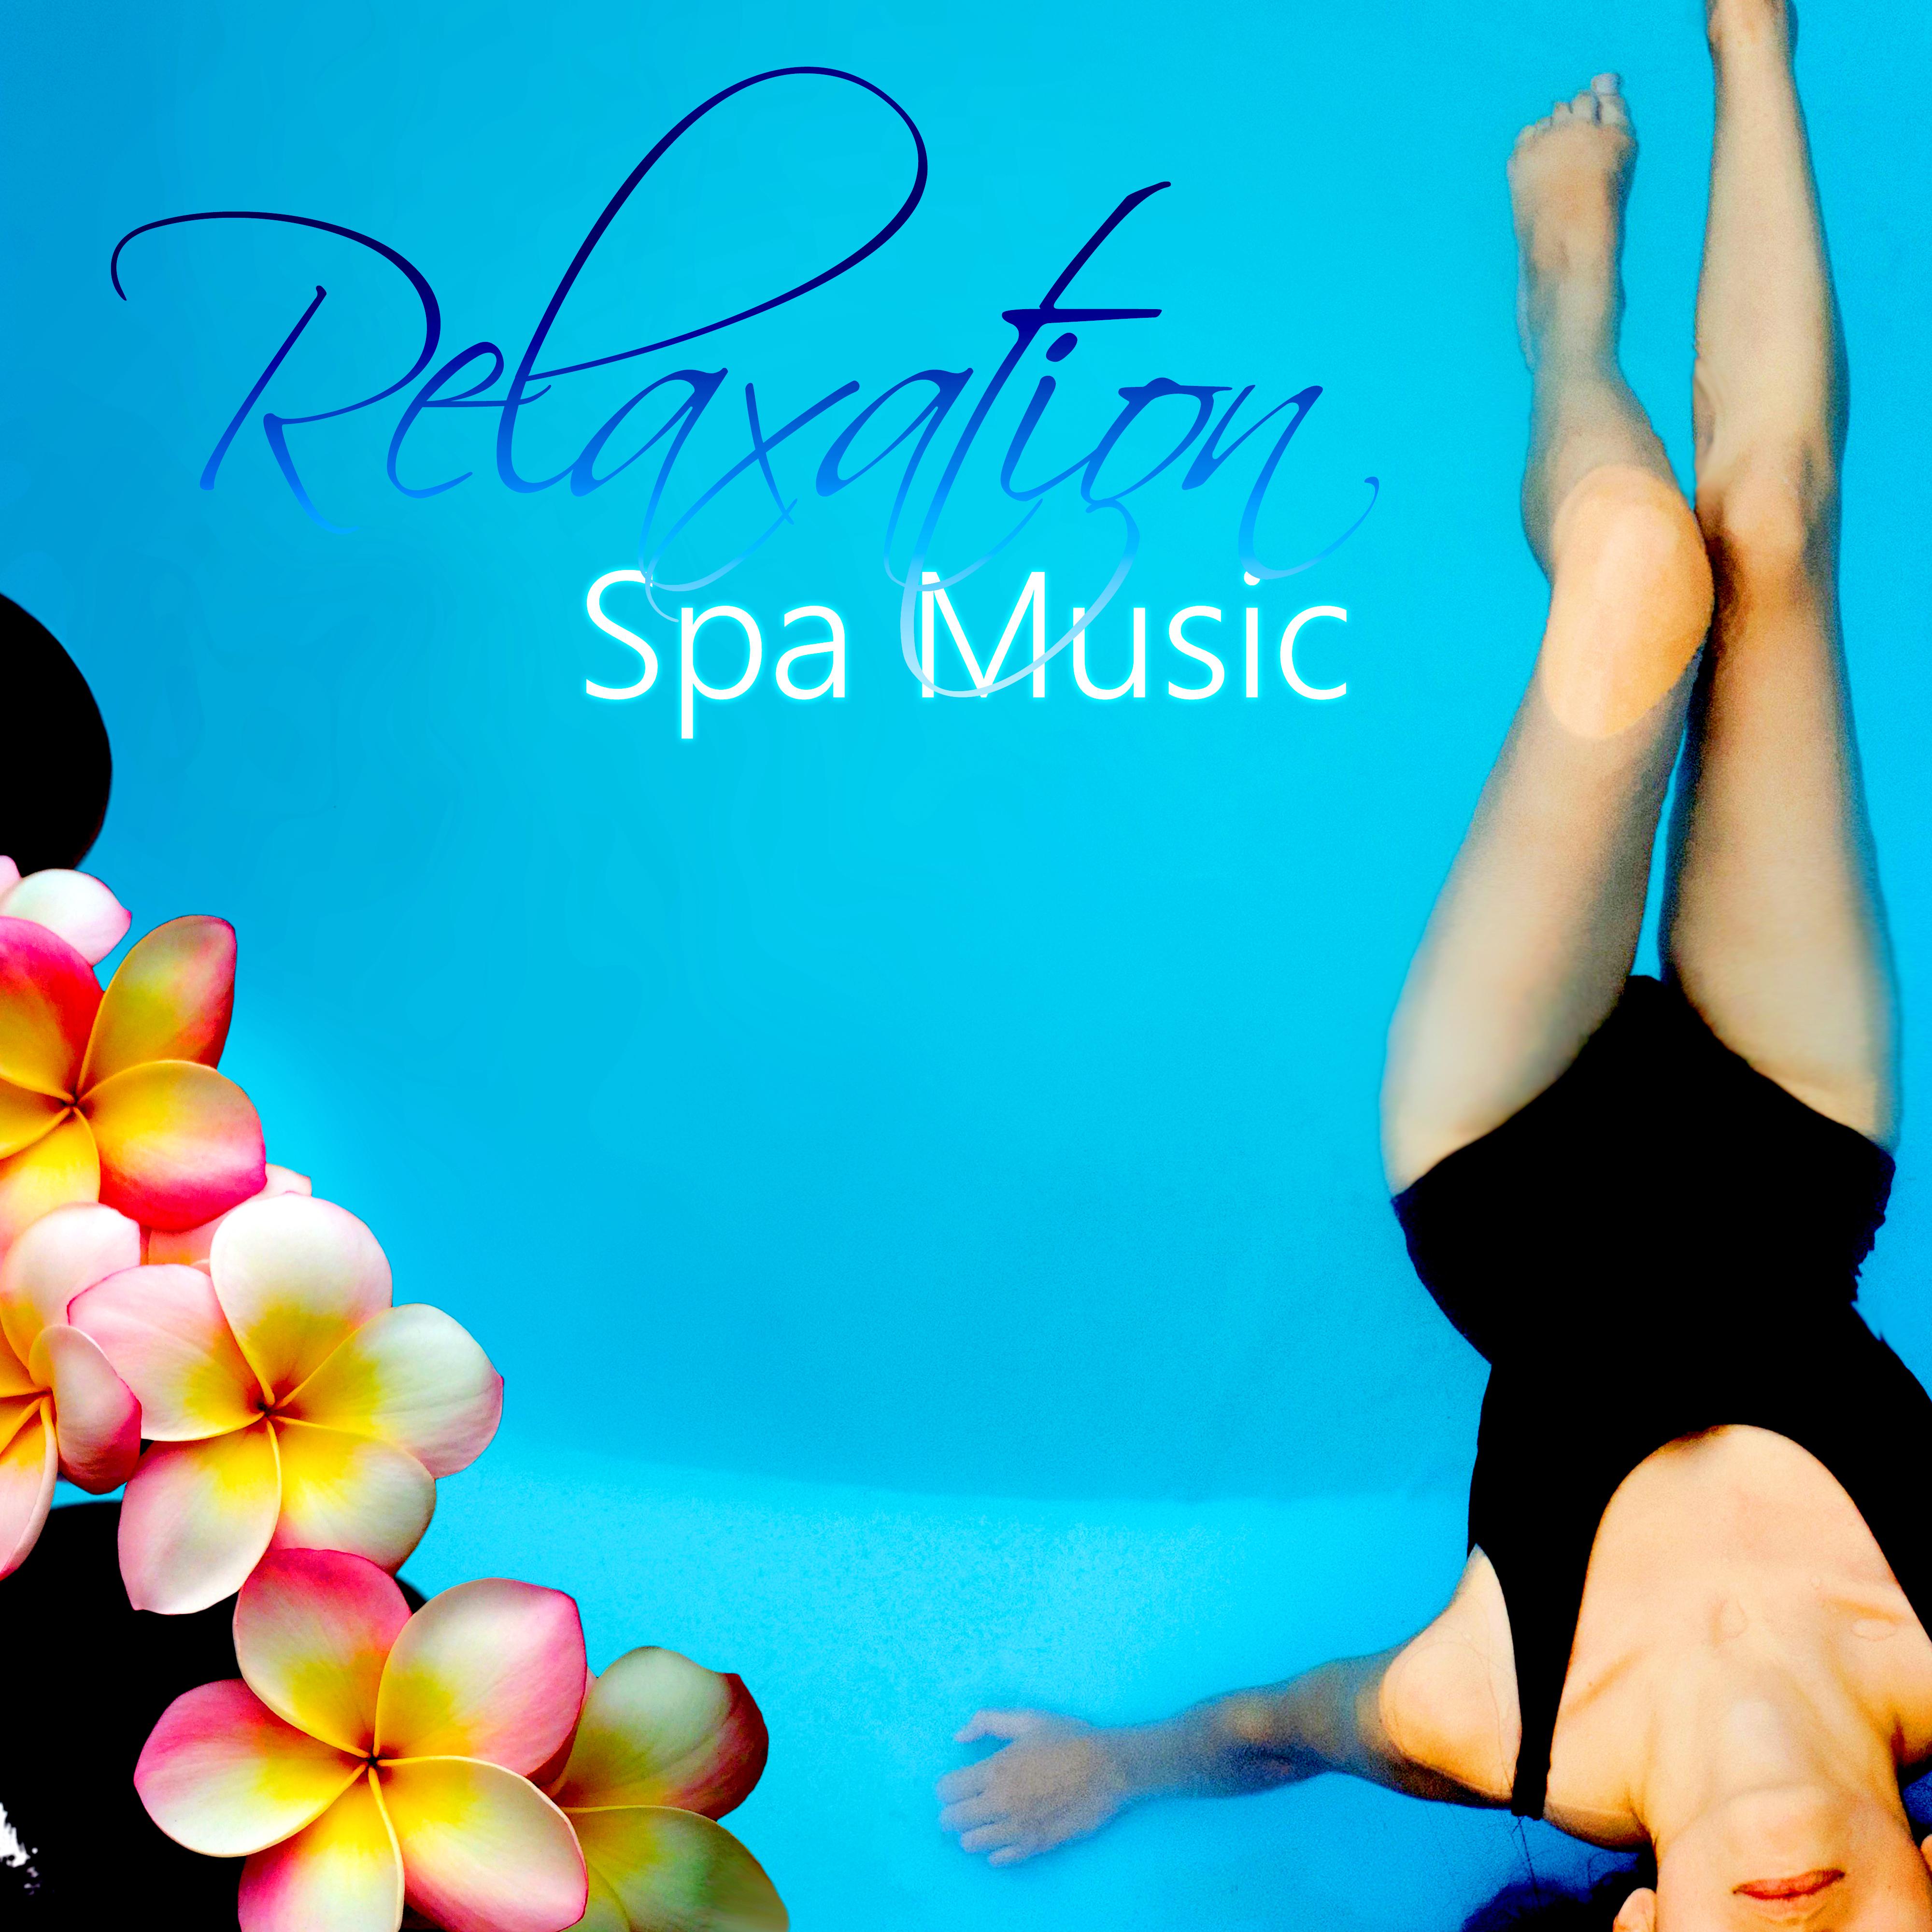 Relaxation Spa Music - Wellness Music for Massage, Mindfulness Meditation, Sounds to Relax, Stress Relief, Calming Sounds for Serenity, Reduce Stress, Brainwave Symphony, Well Being